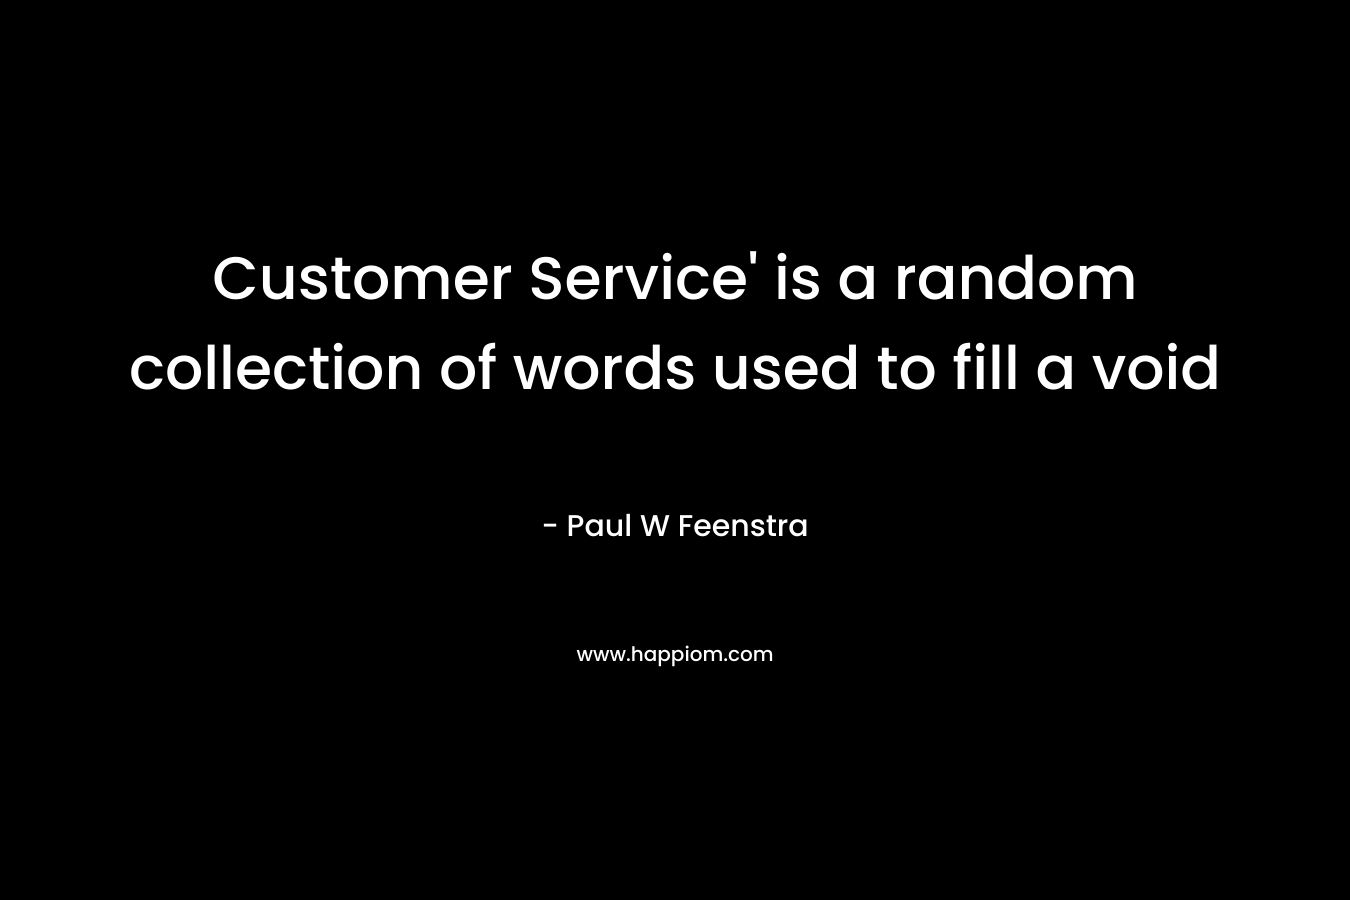 Customer Service’ is a random collection of words used to fill a void – Paul W Feenstra